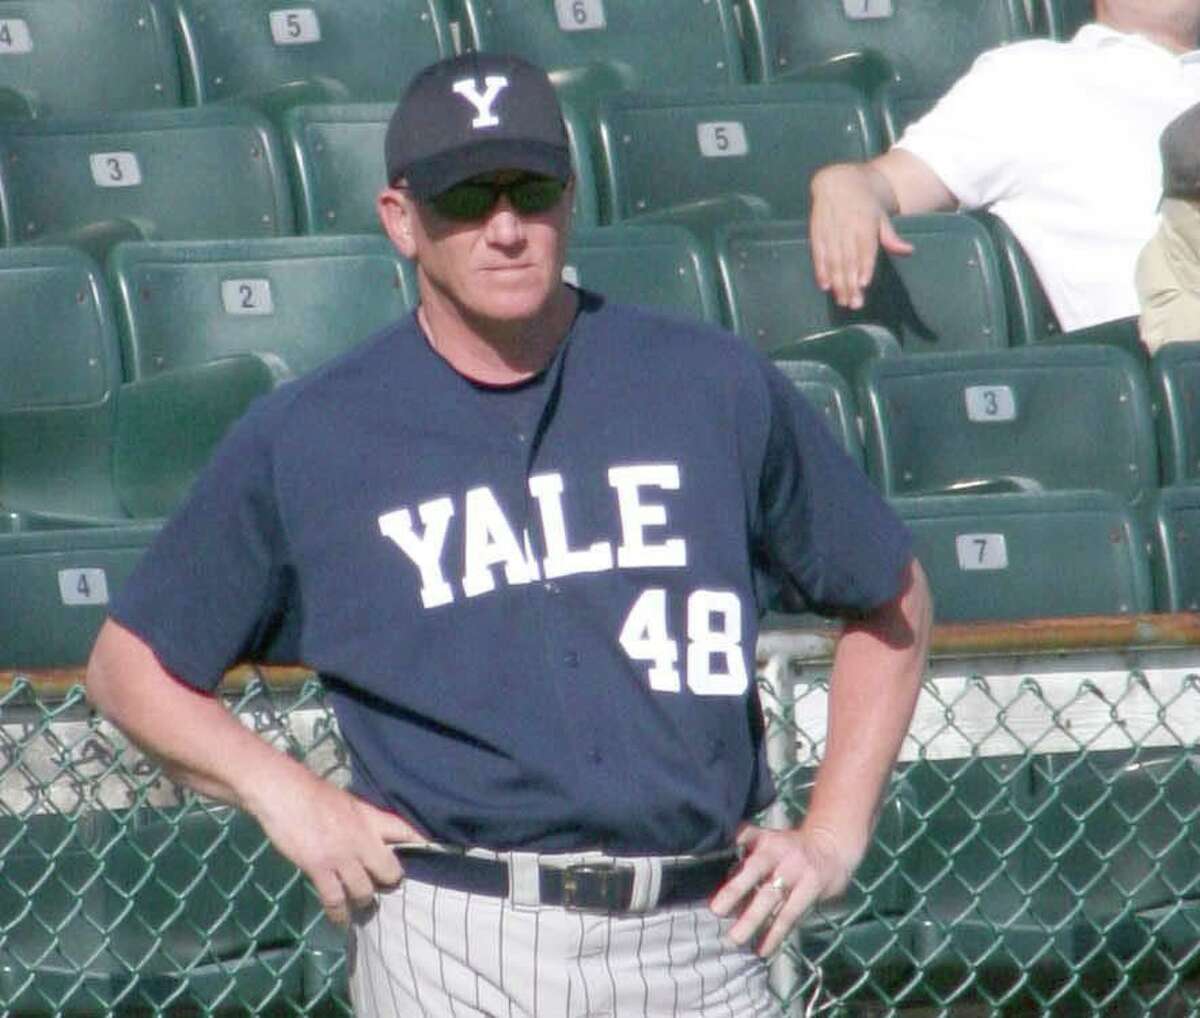 John Stuper, 65, is retiring after 30 years as Yale baseball coach. He is the Bulldogs' all-time winningest coach with a career record of 551-626-4. Yale hosts Harvard for the final three games of the season this weekend. Stuper will be honored in between games of Saturday's doubleheader. Also Saturday, Yale will dedicate George H.W. Bush '48 Field and the Jim Neil '76 Clubhouse. Sunday is Senior Day and the season finale.